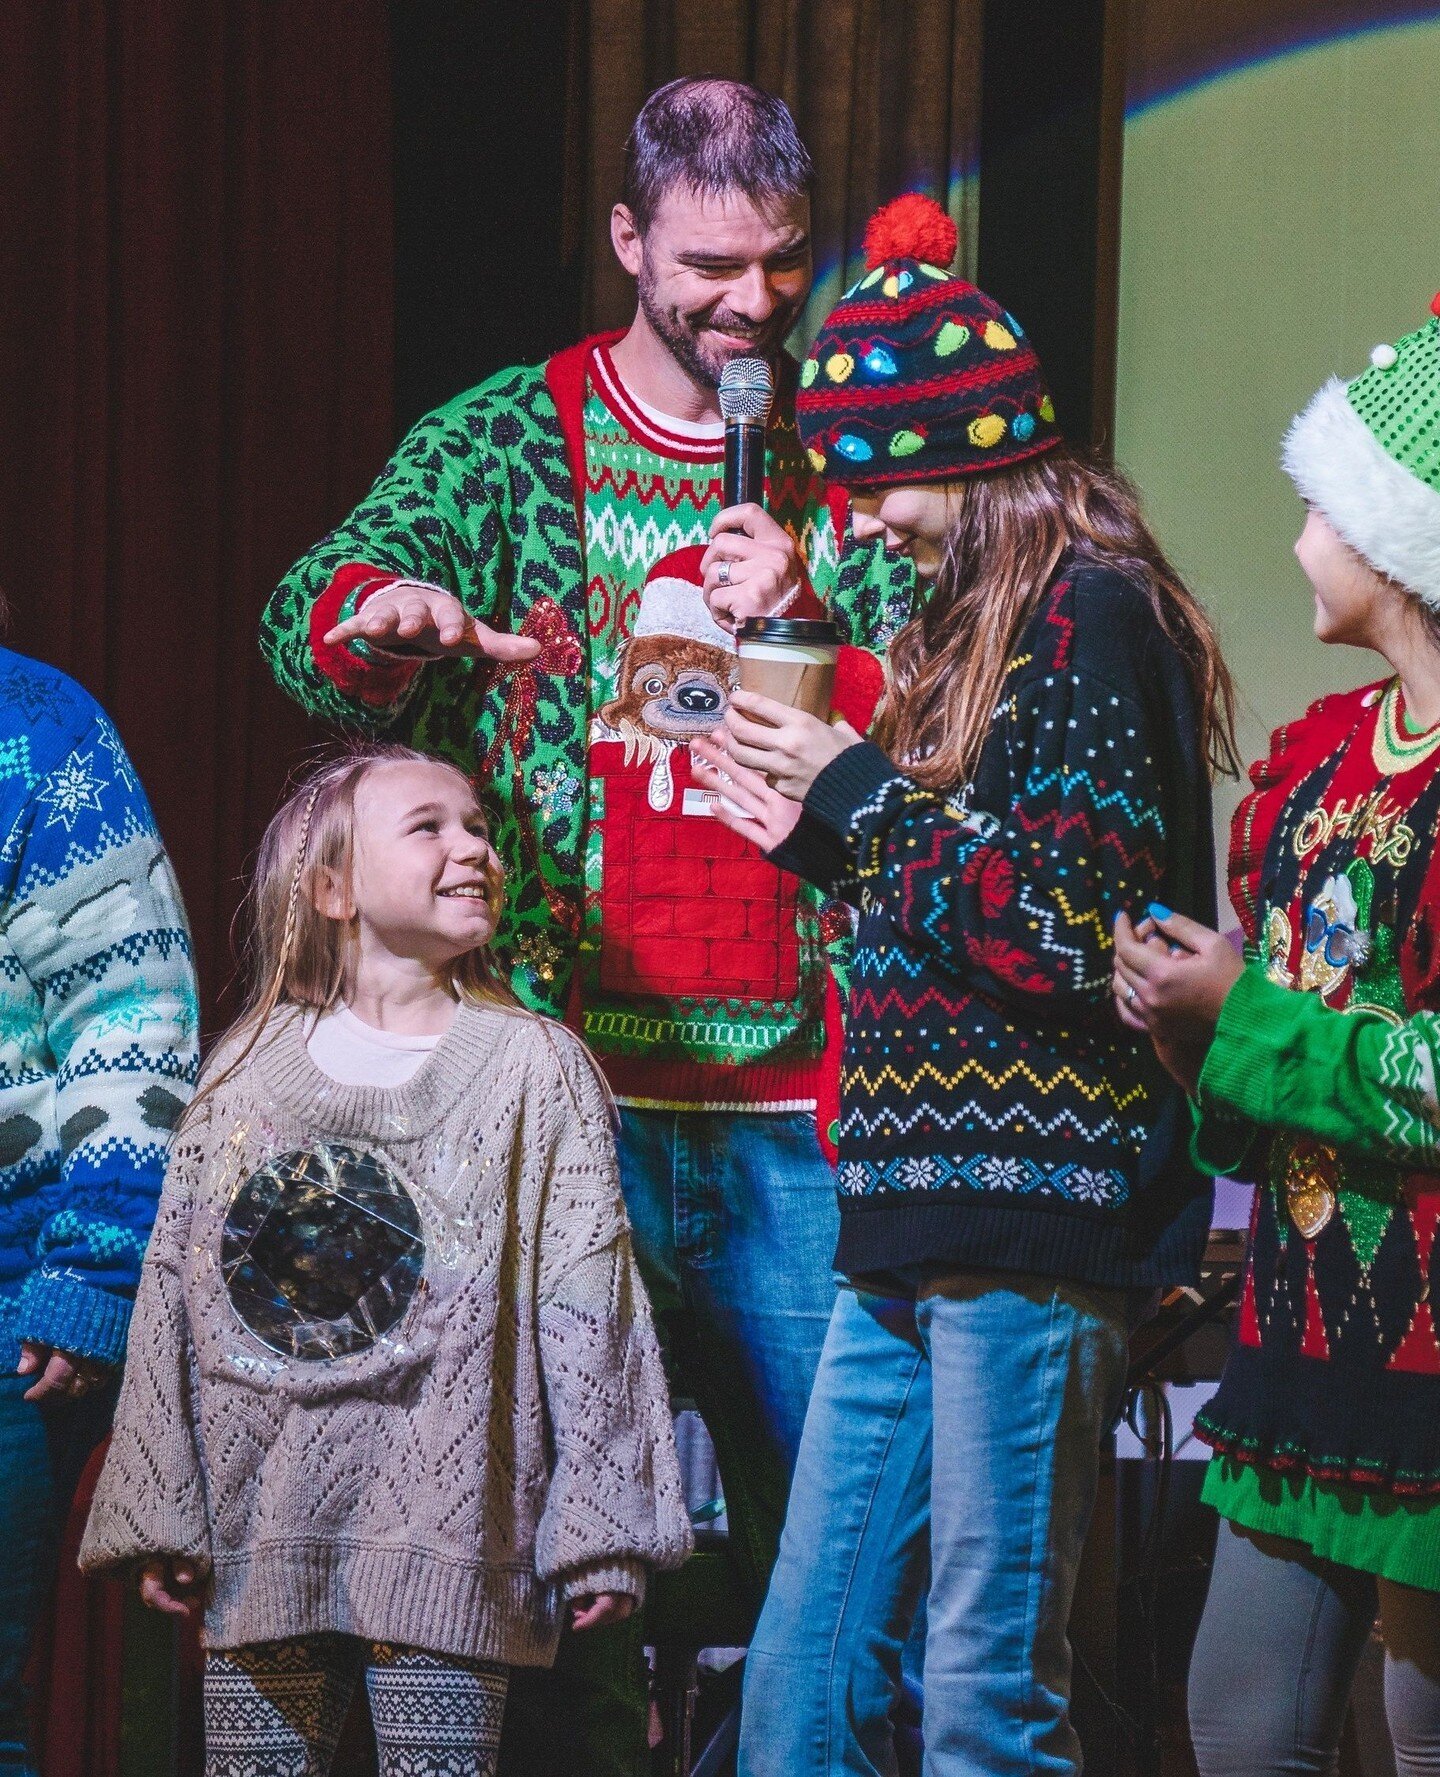 What fun Sunday we had with our ugly sweater contest! We loved getting to have fun and worship with you all!